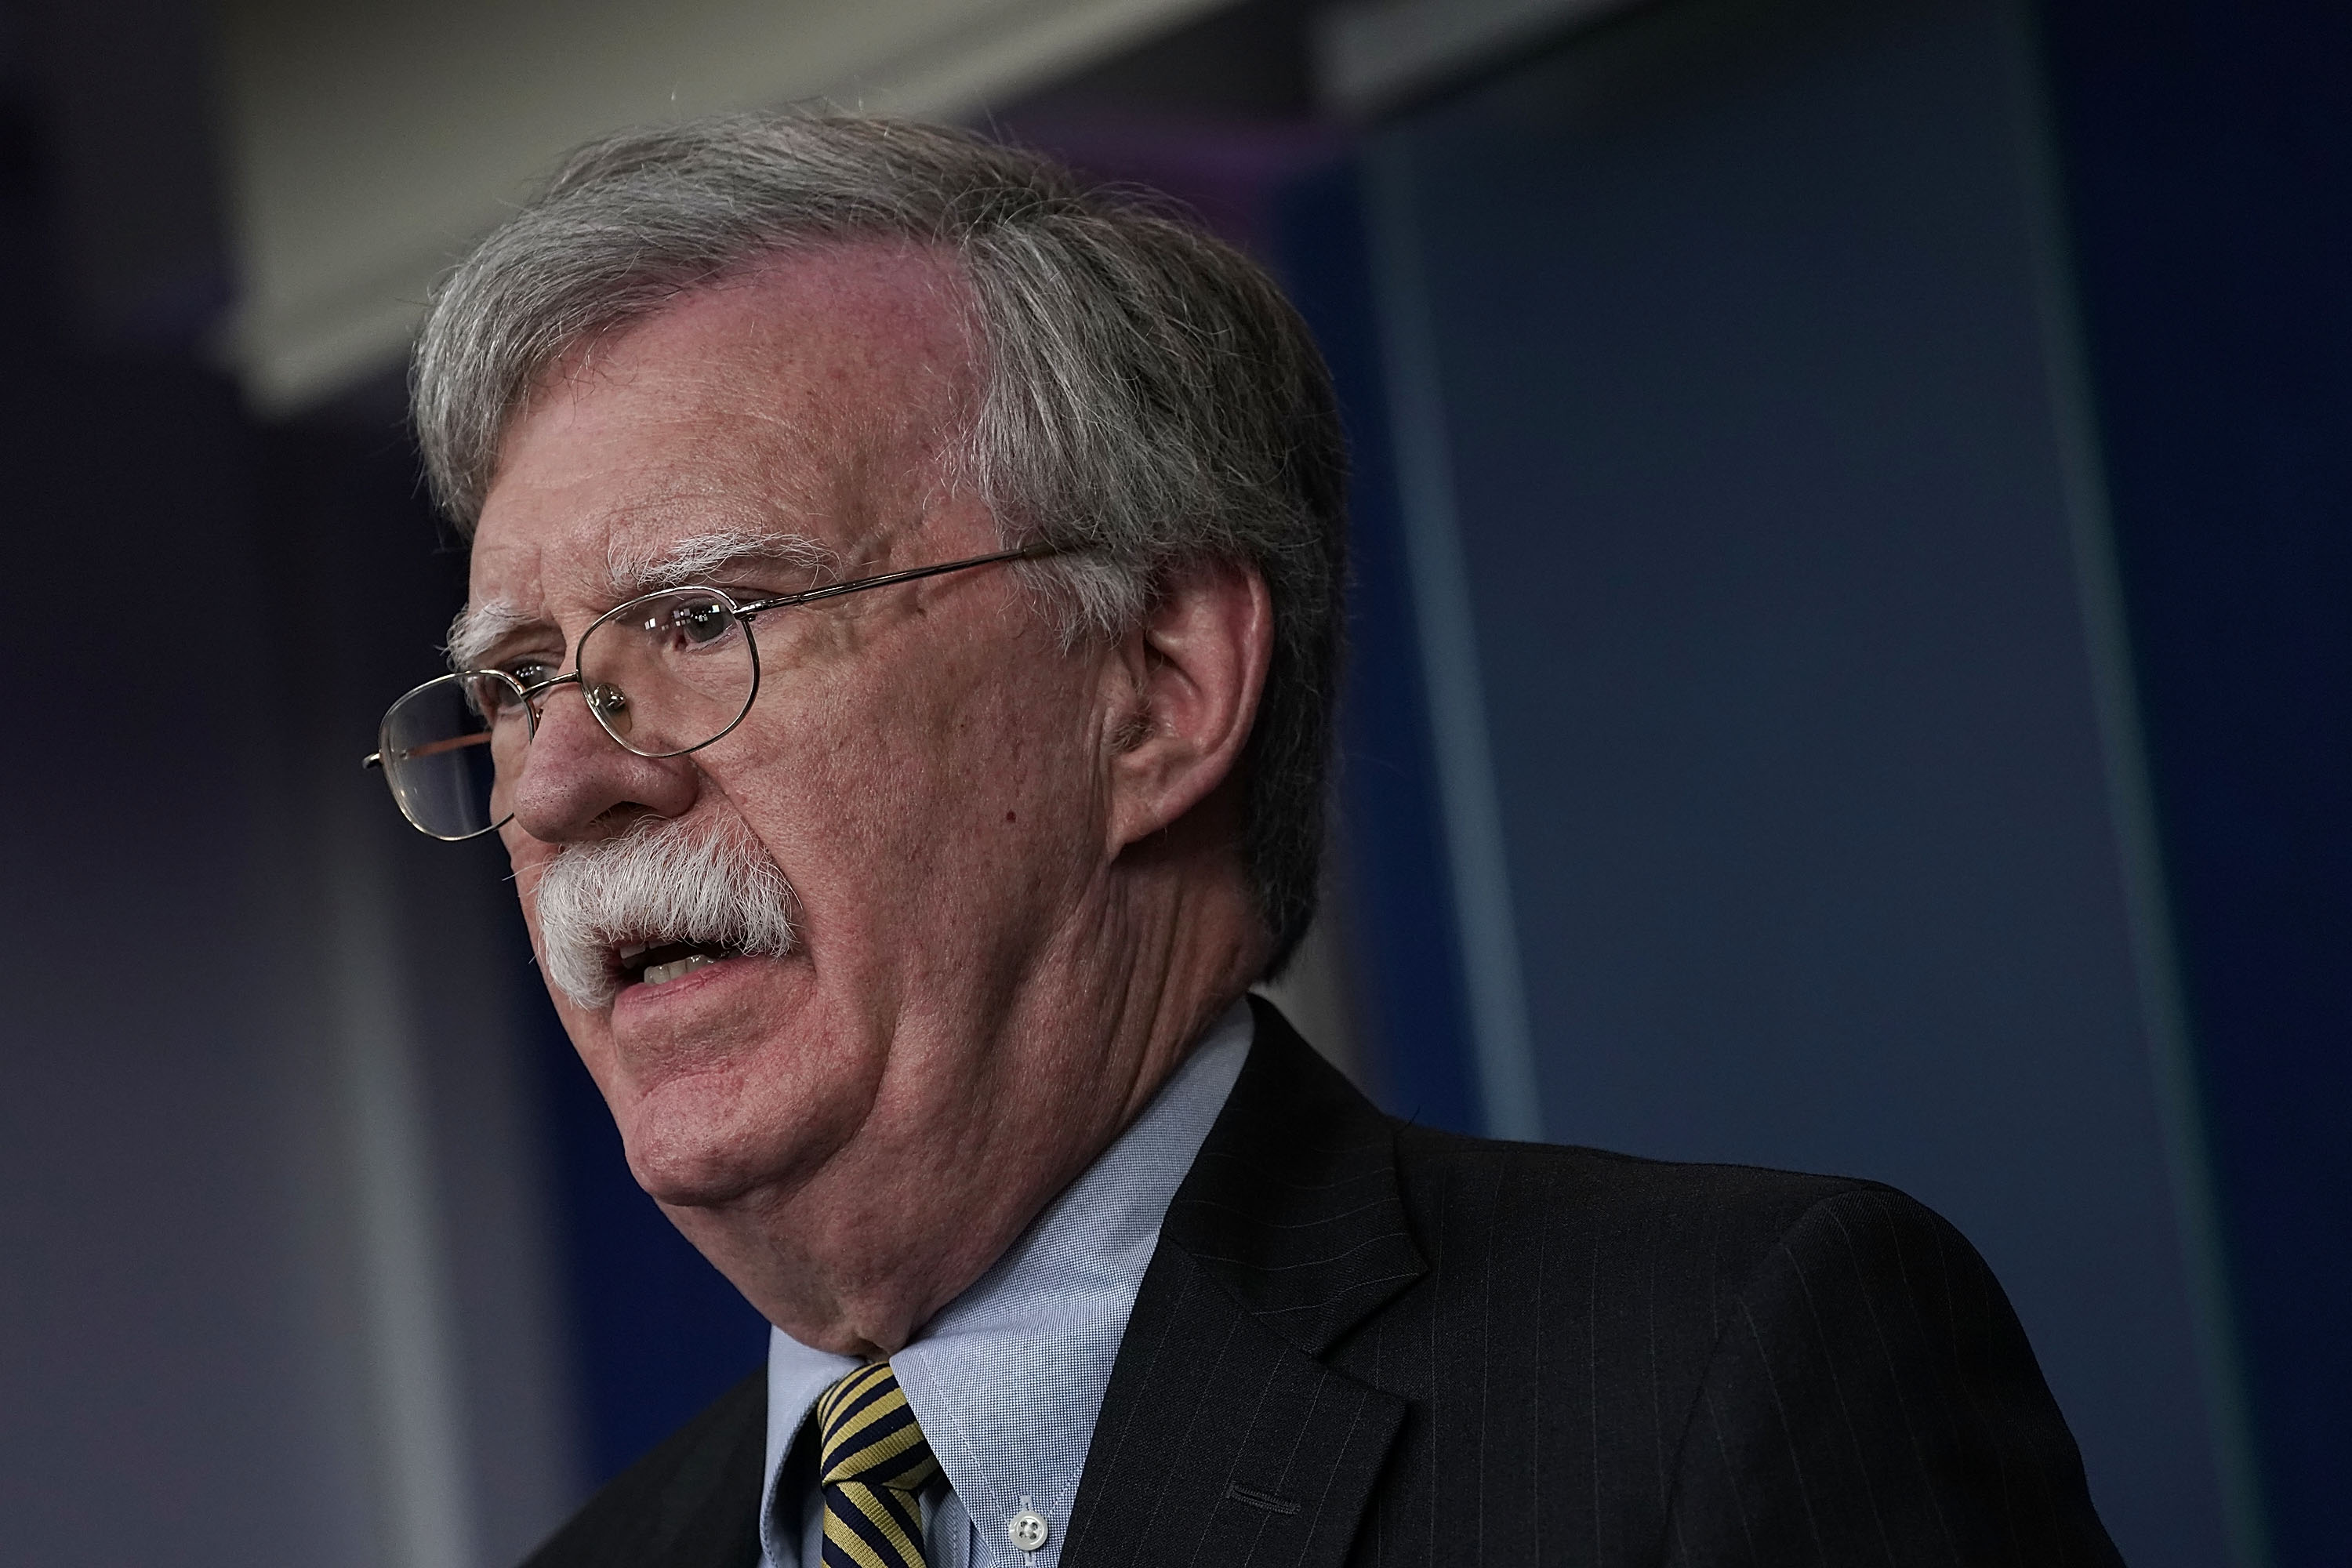 National Security Adviser John Bolton reportedly told Turkish officials US troops would remain in Syria to counter Iran.